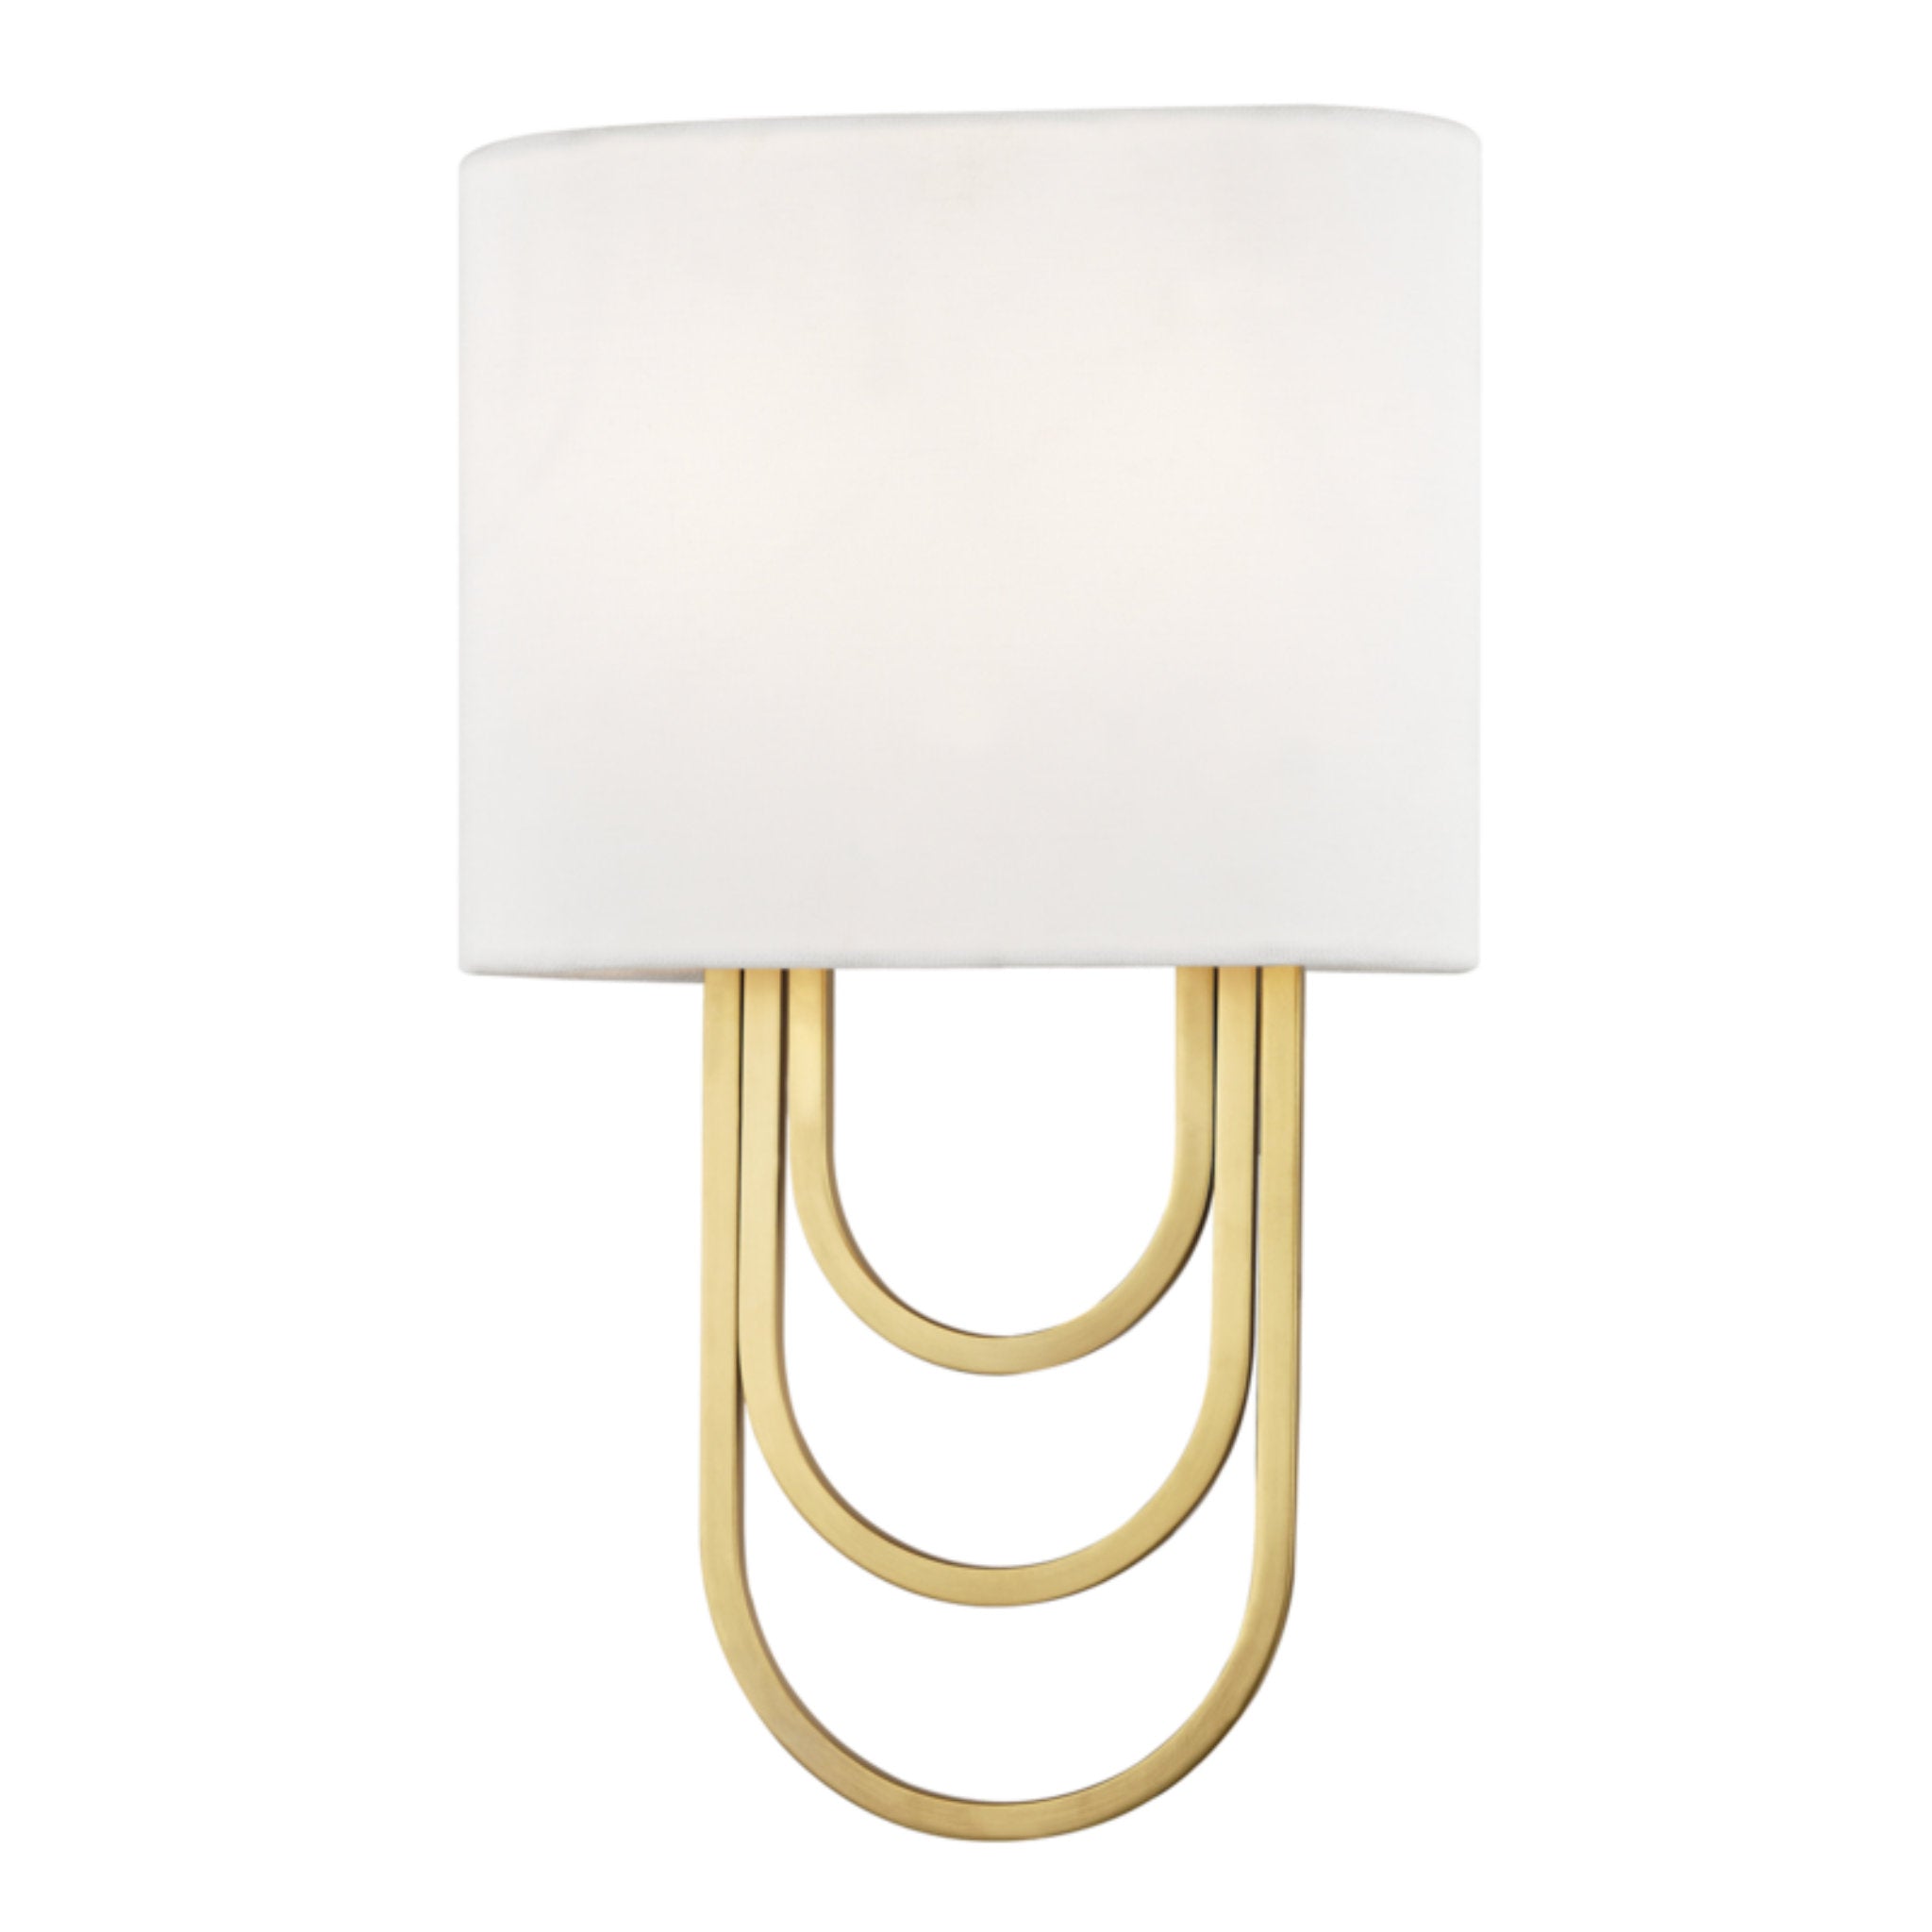 Farah 2-Light Wall Sconce in Aged Brass